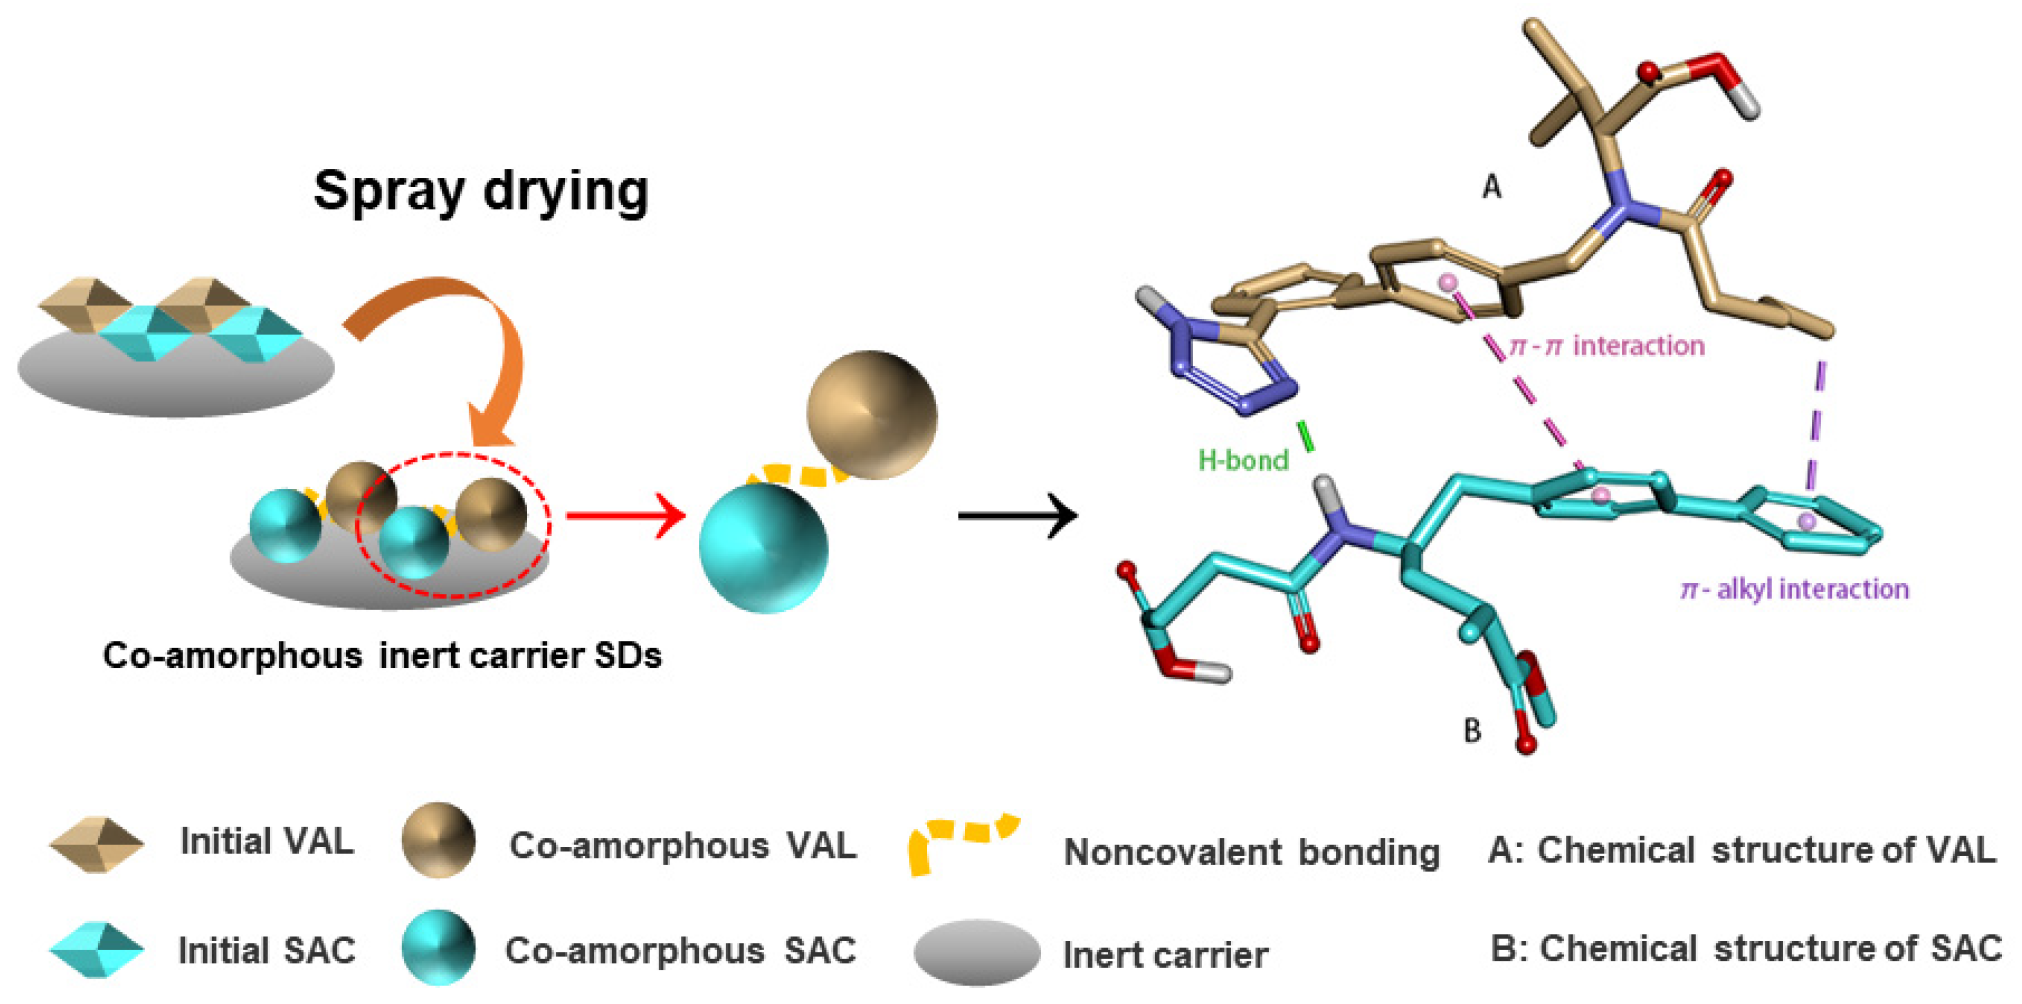 Pharmaceutics | Free Full-Text | Combining Co-Amorphous-Based Spray Drying  with Inert Carriers to Achieve Improved Bioavailability and Excellent  Downstream Manufacturability | HTML